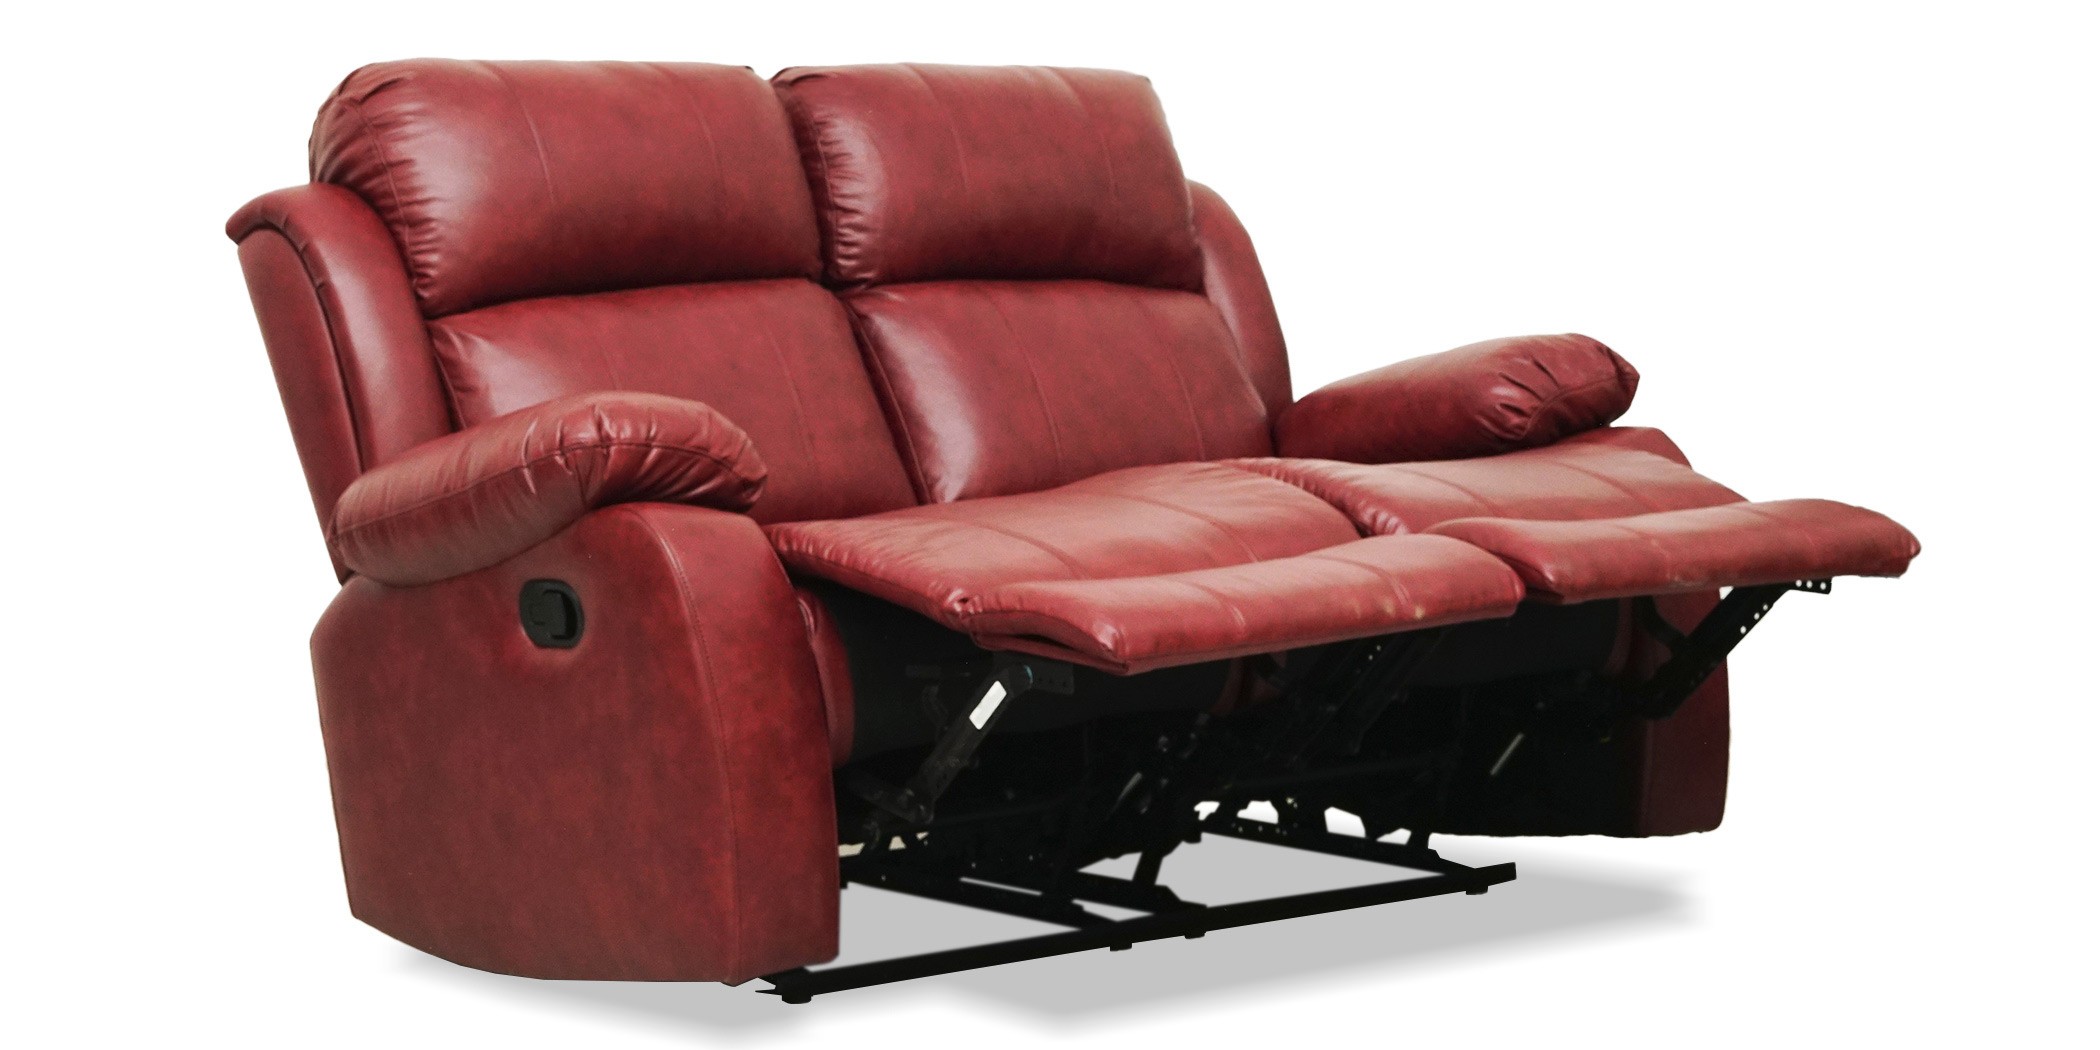 Vercelli Sofa 3+2 in Red Leather Gel